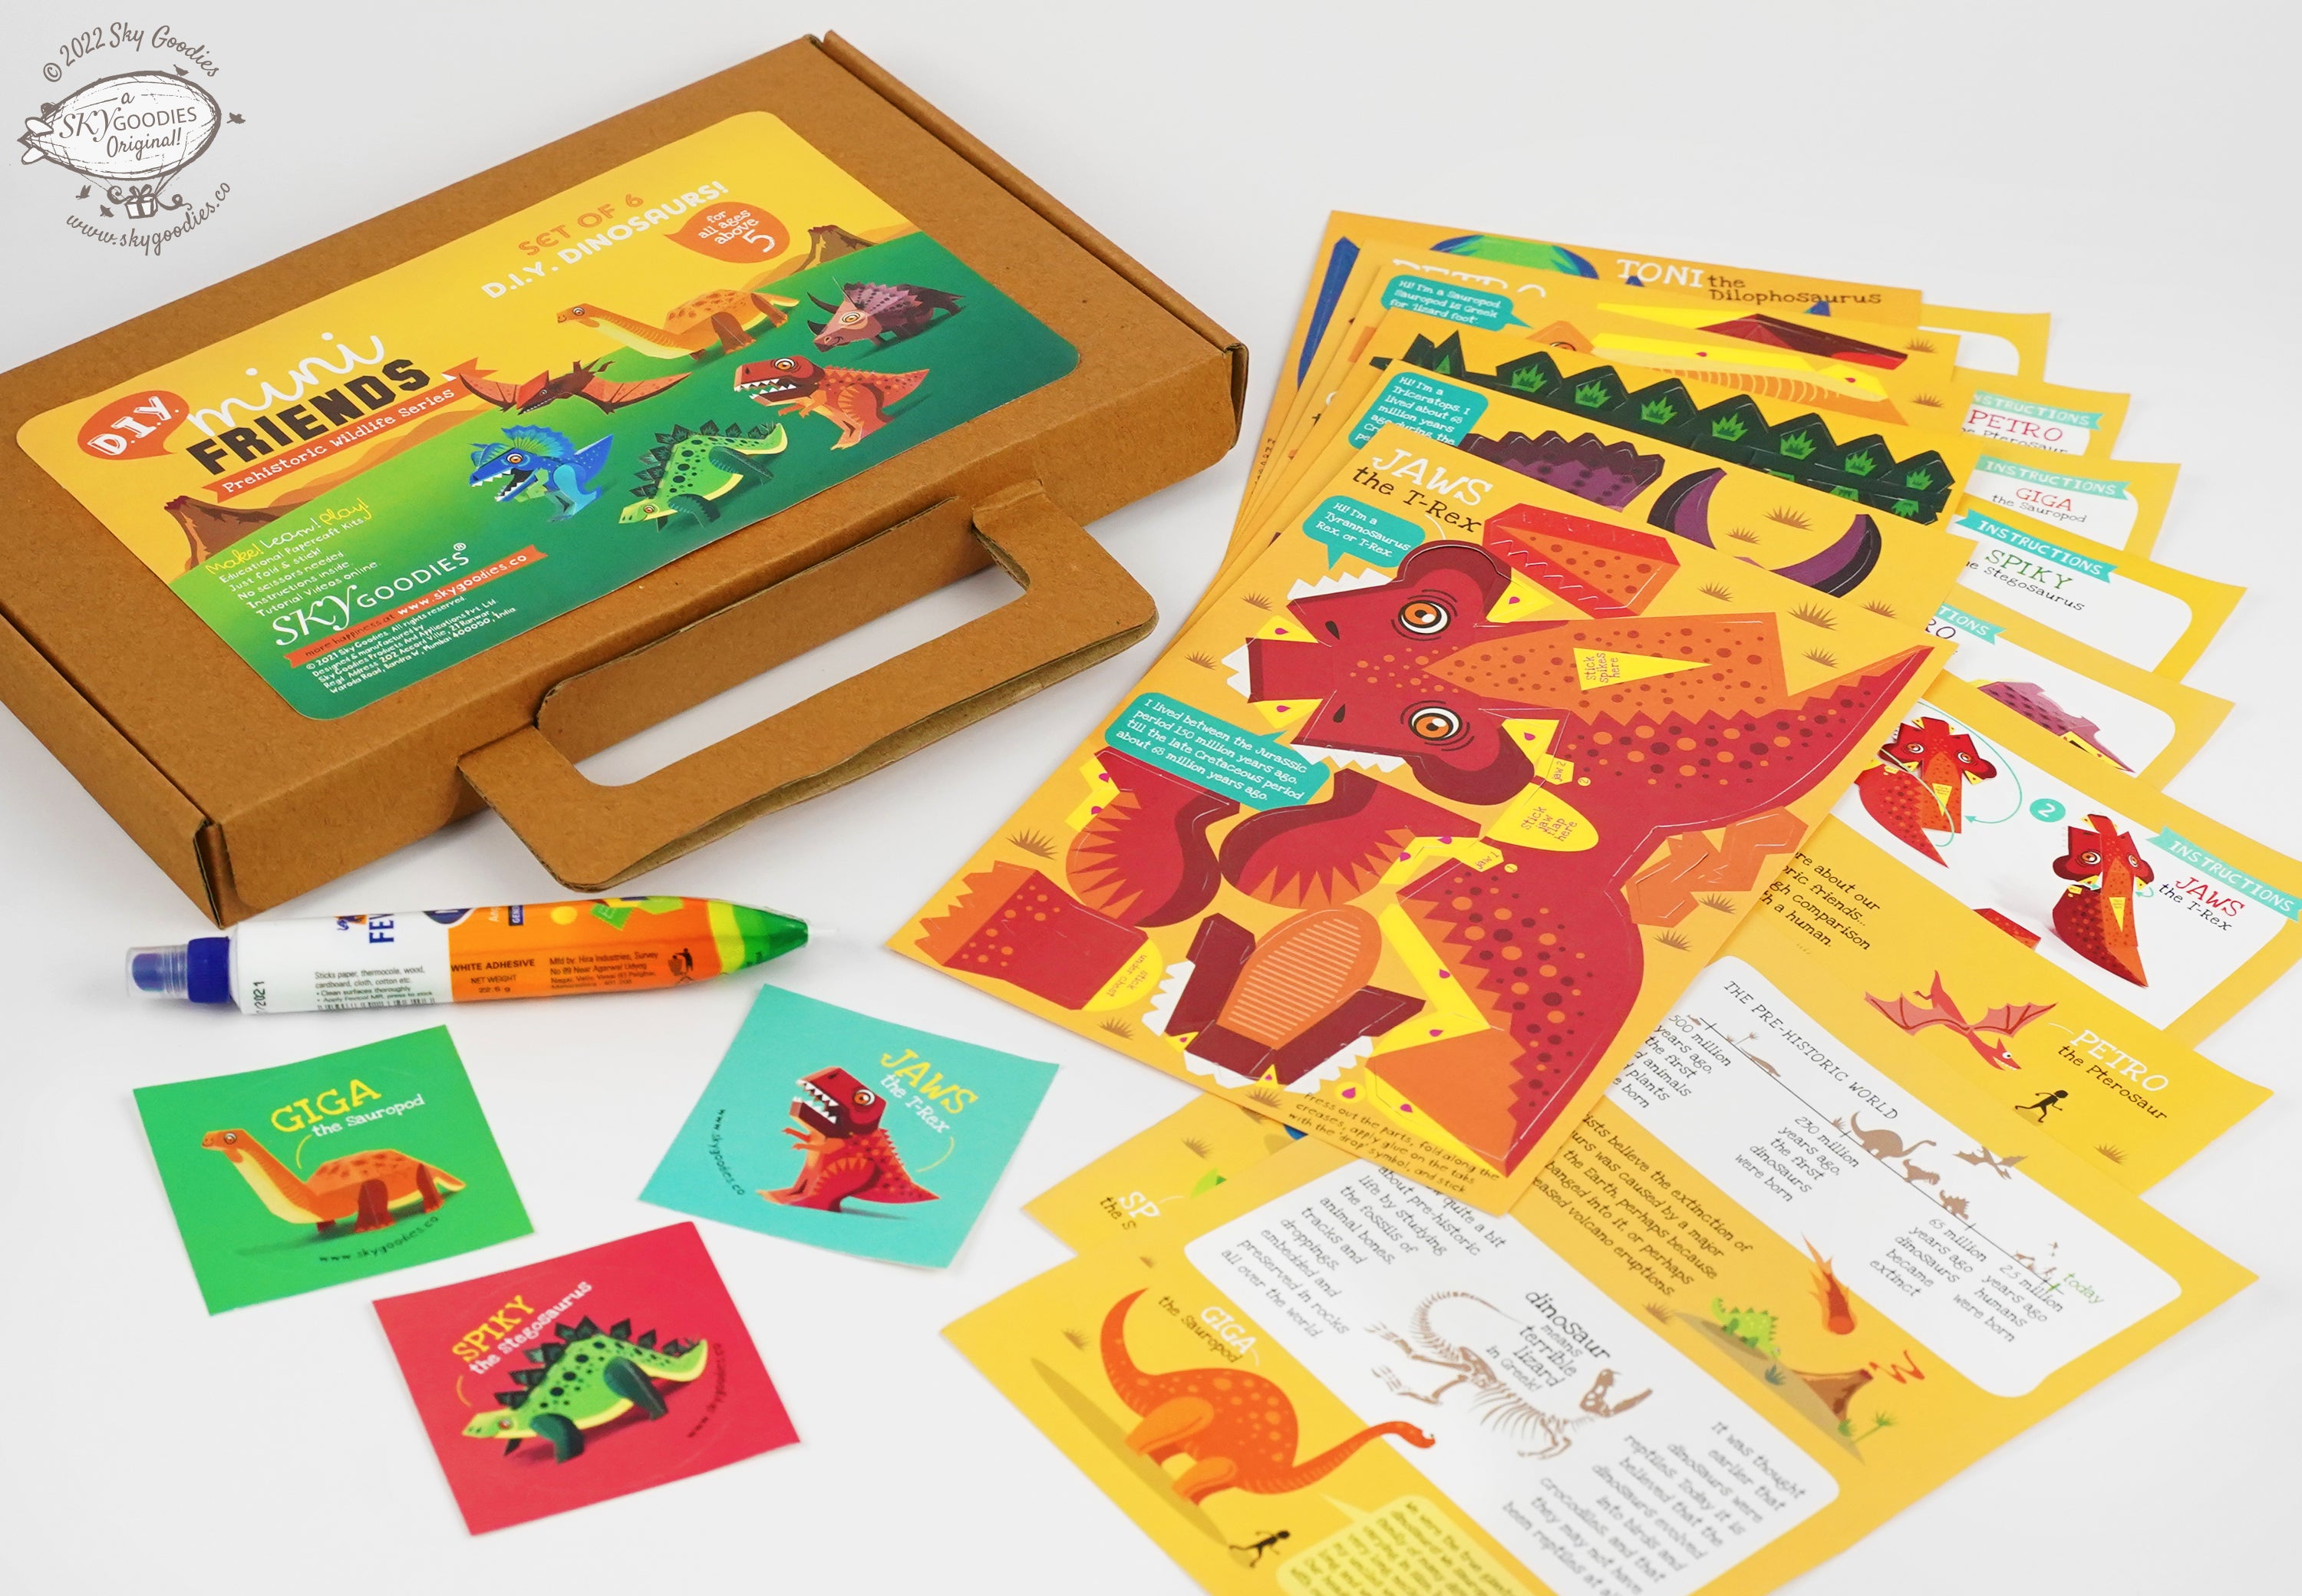 3D Dinosaur Puzzles for Kids - Set of 6